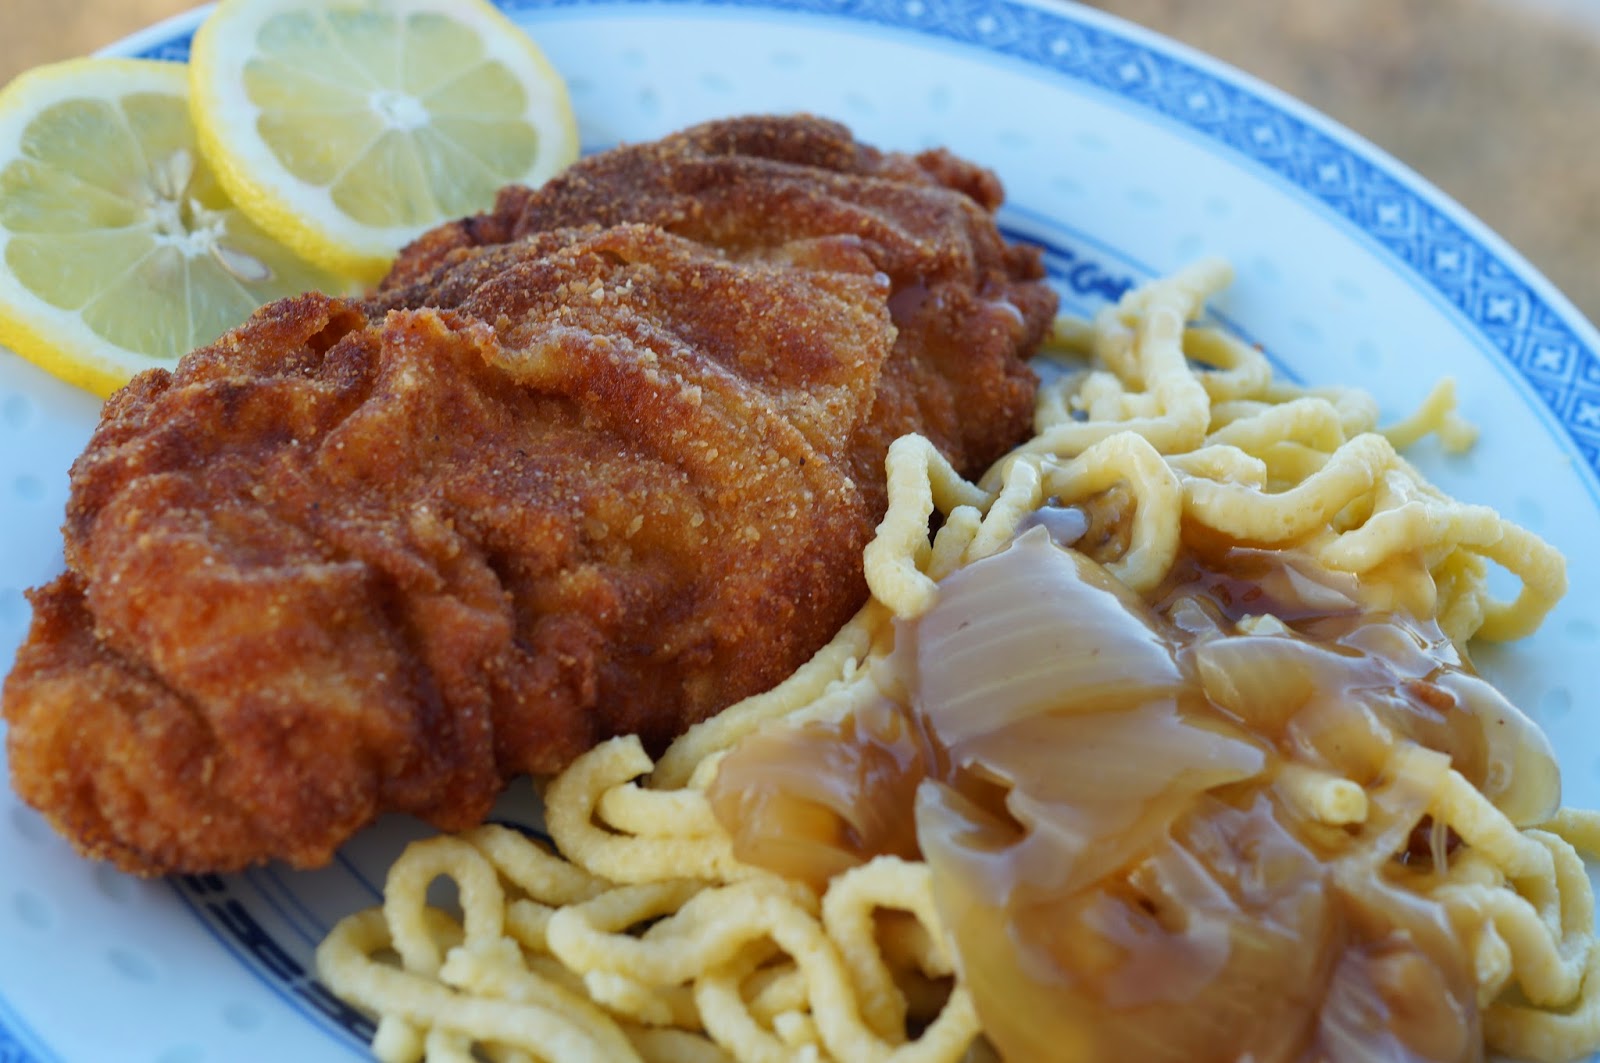 In the Kitchen with Jenny: Schnitzel and Jäger Sauce